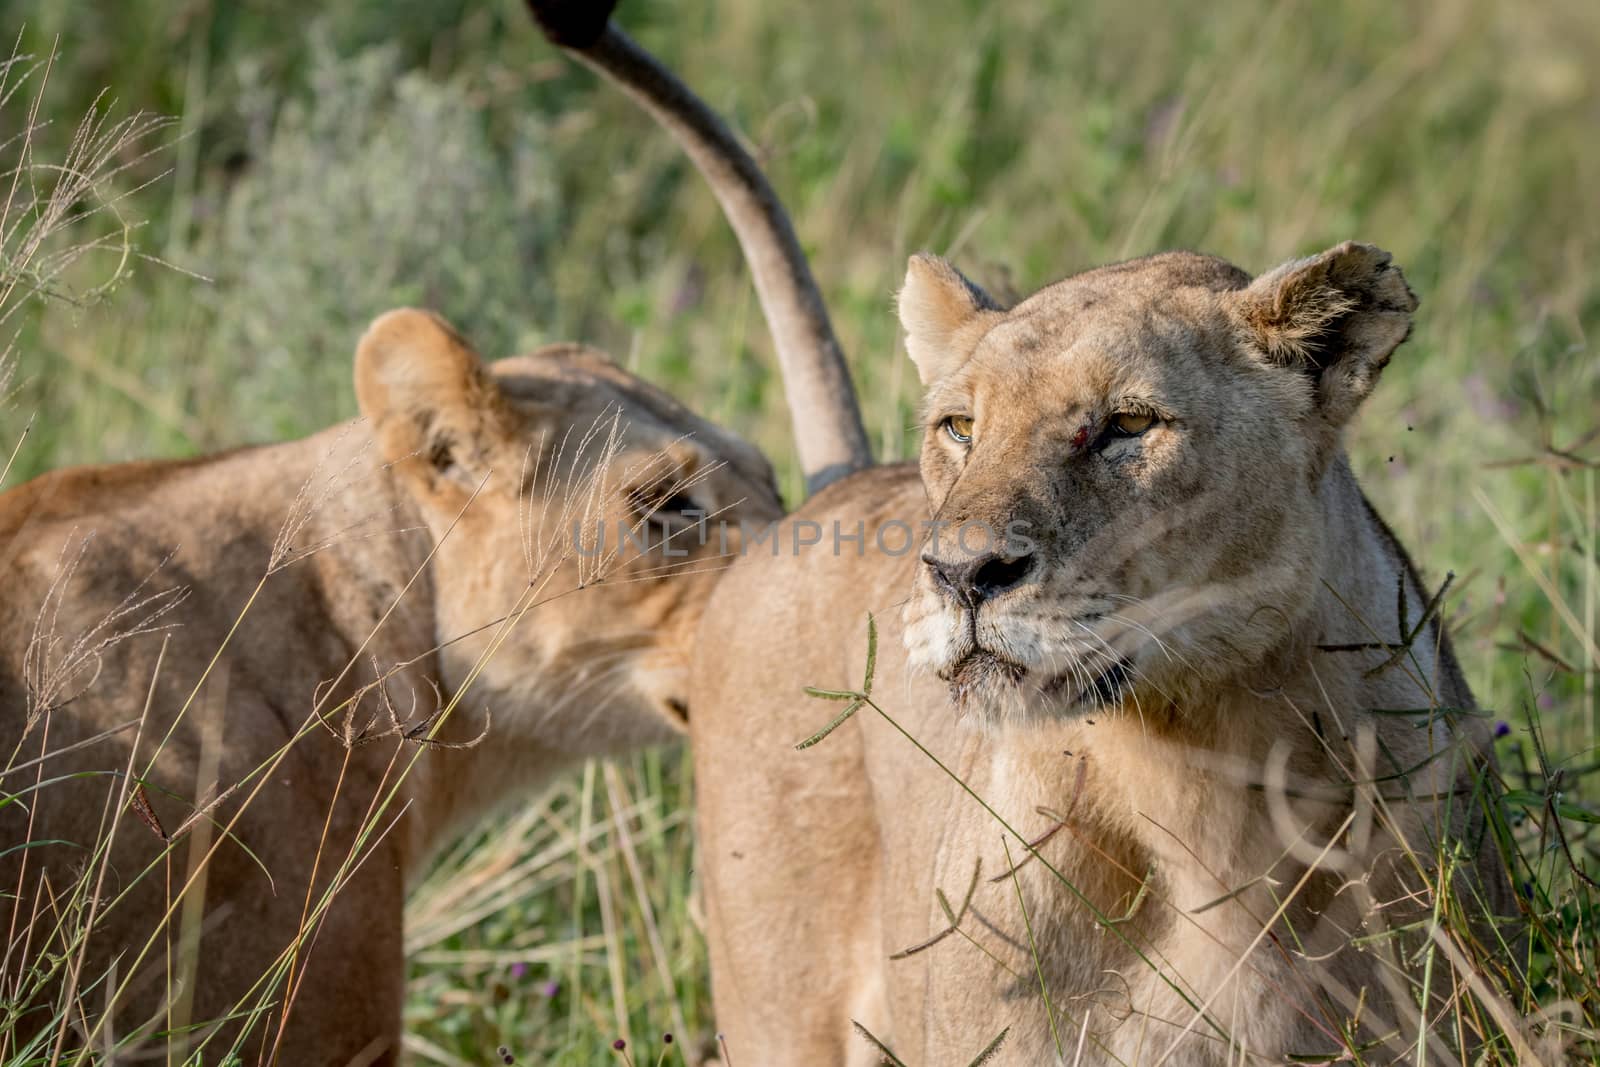 Two Lions bonding in the grass in the Chobe National Park, Botswana.